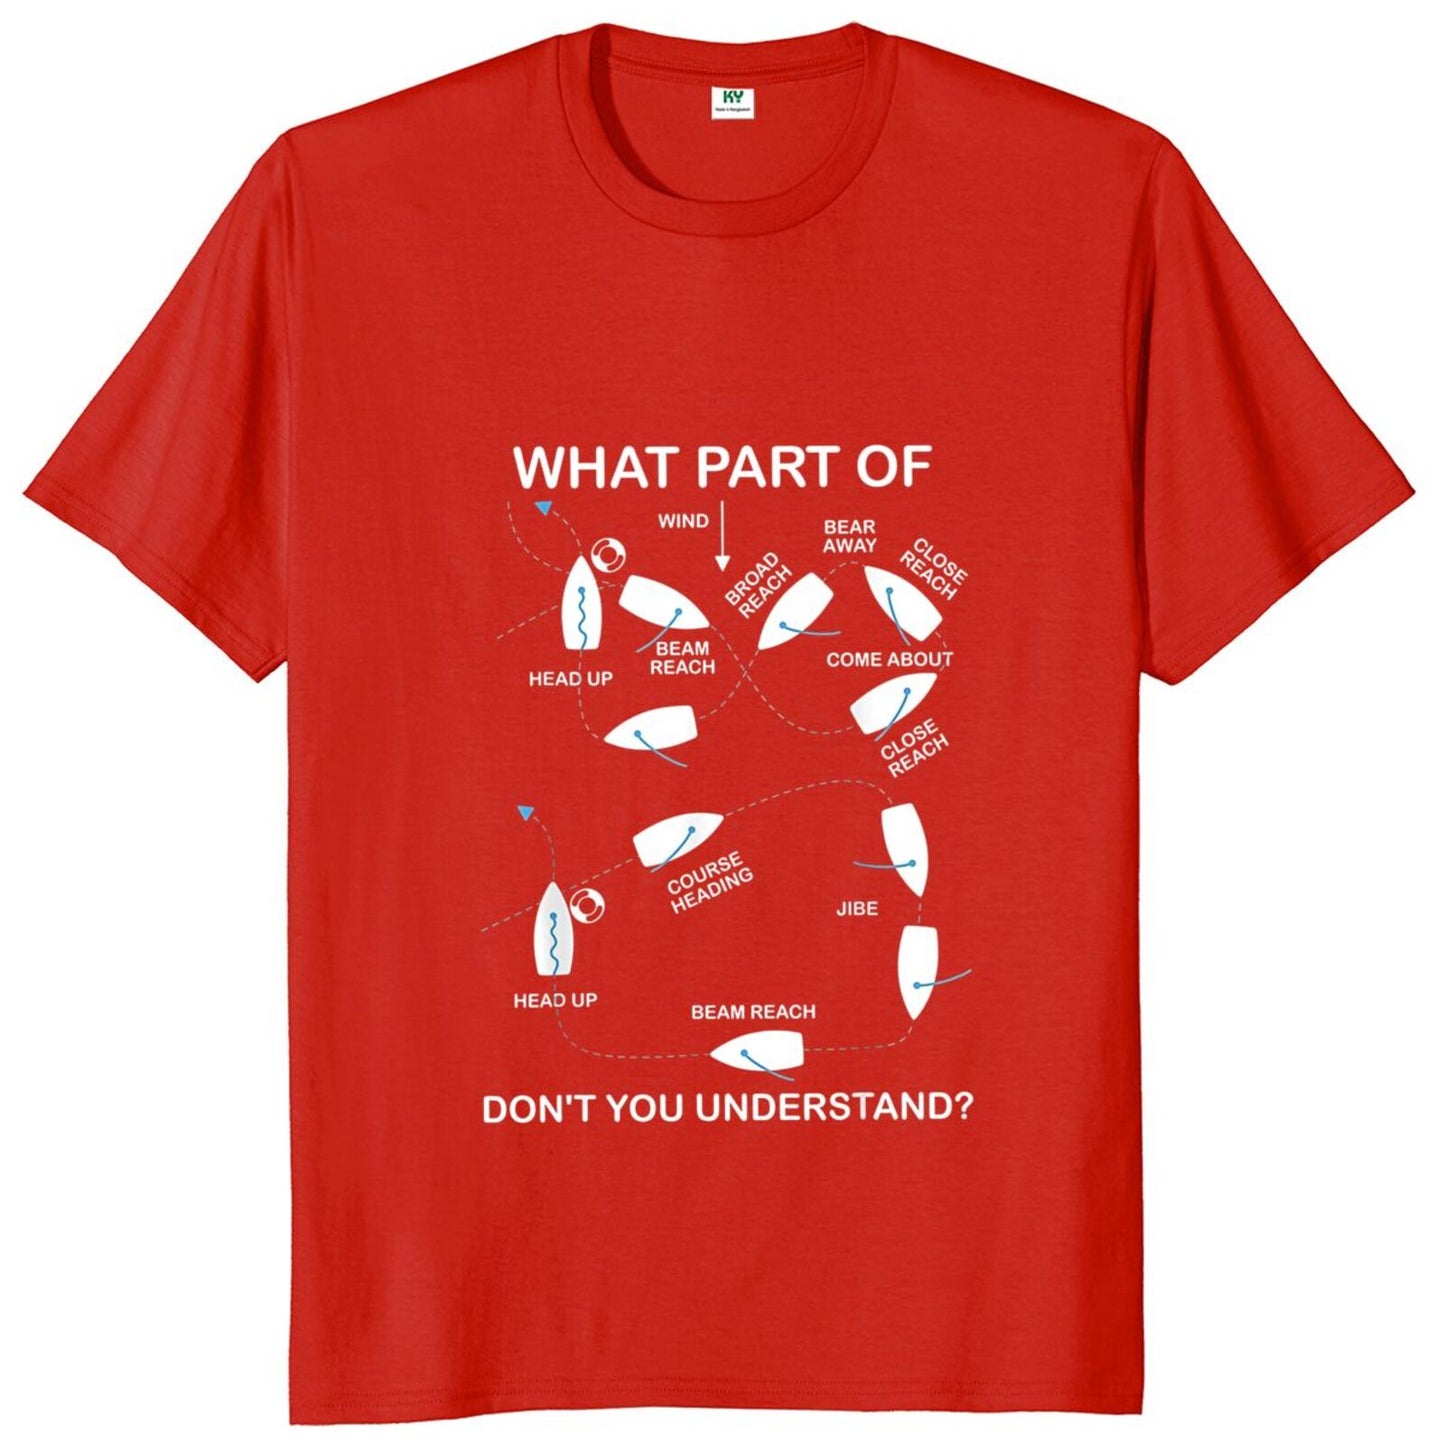 What Part Of Ship Don't You Understand T Shirt Funny Sailing Ship Lovers Gift Tee   Tops Casual Unisex Cotton T-shirts EU Size